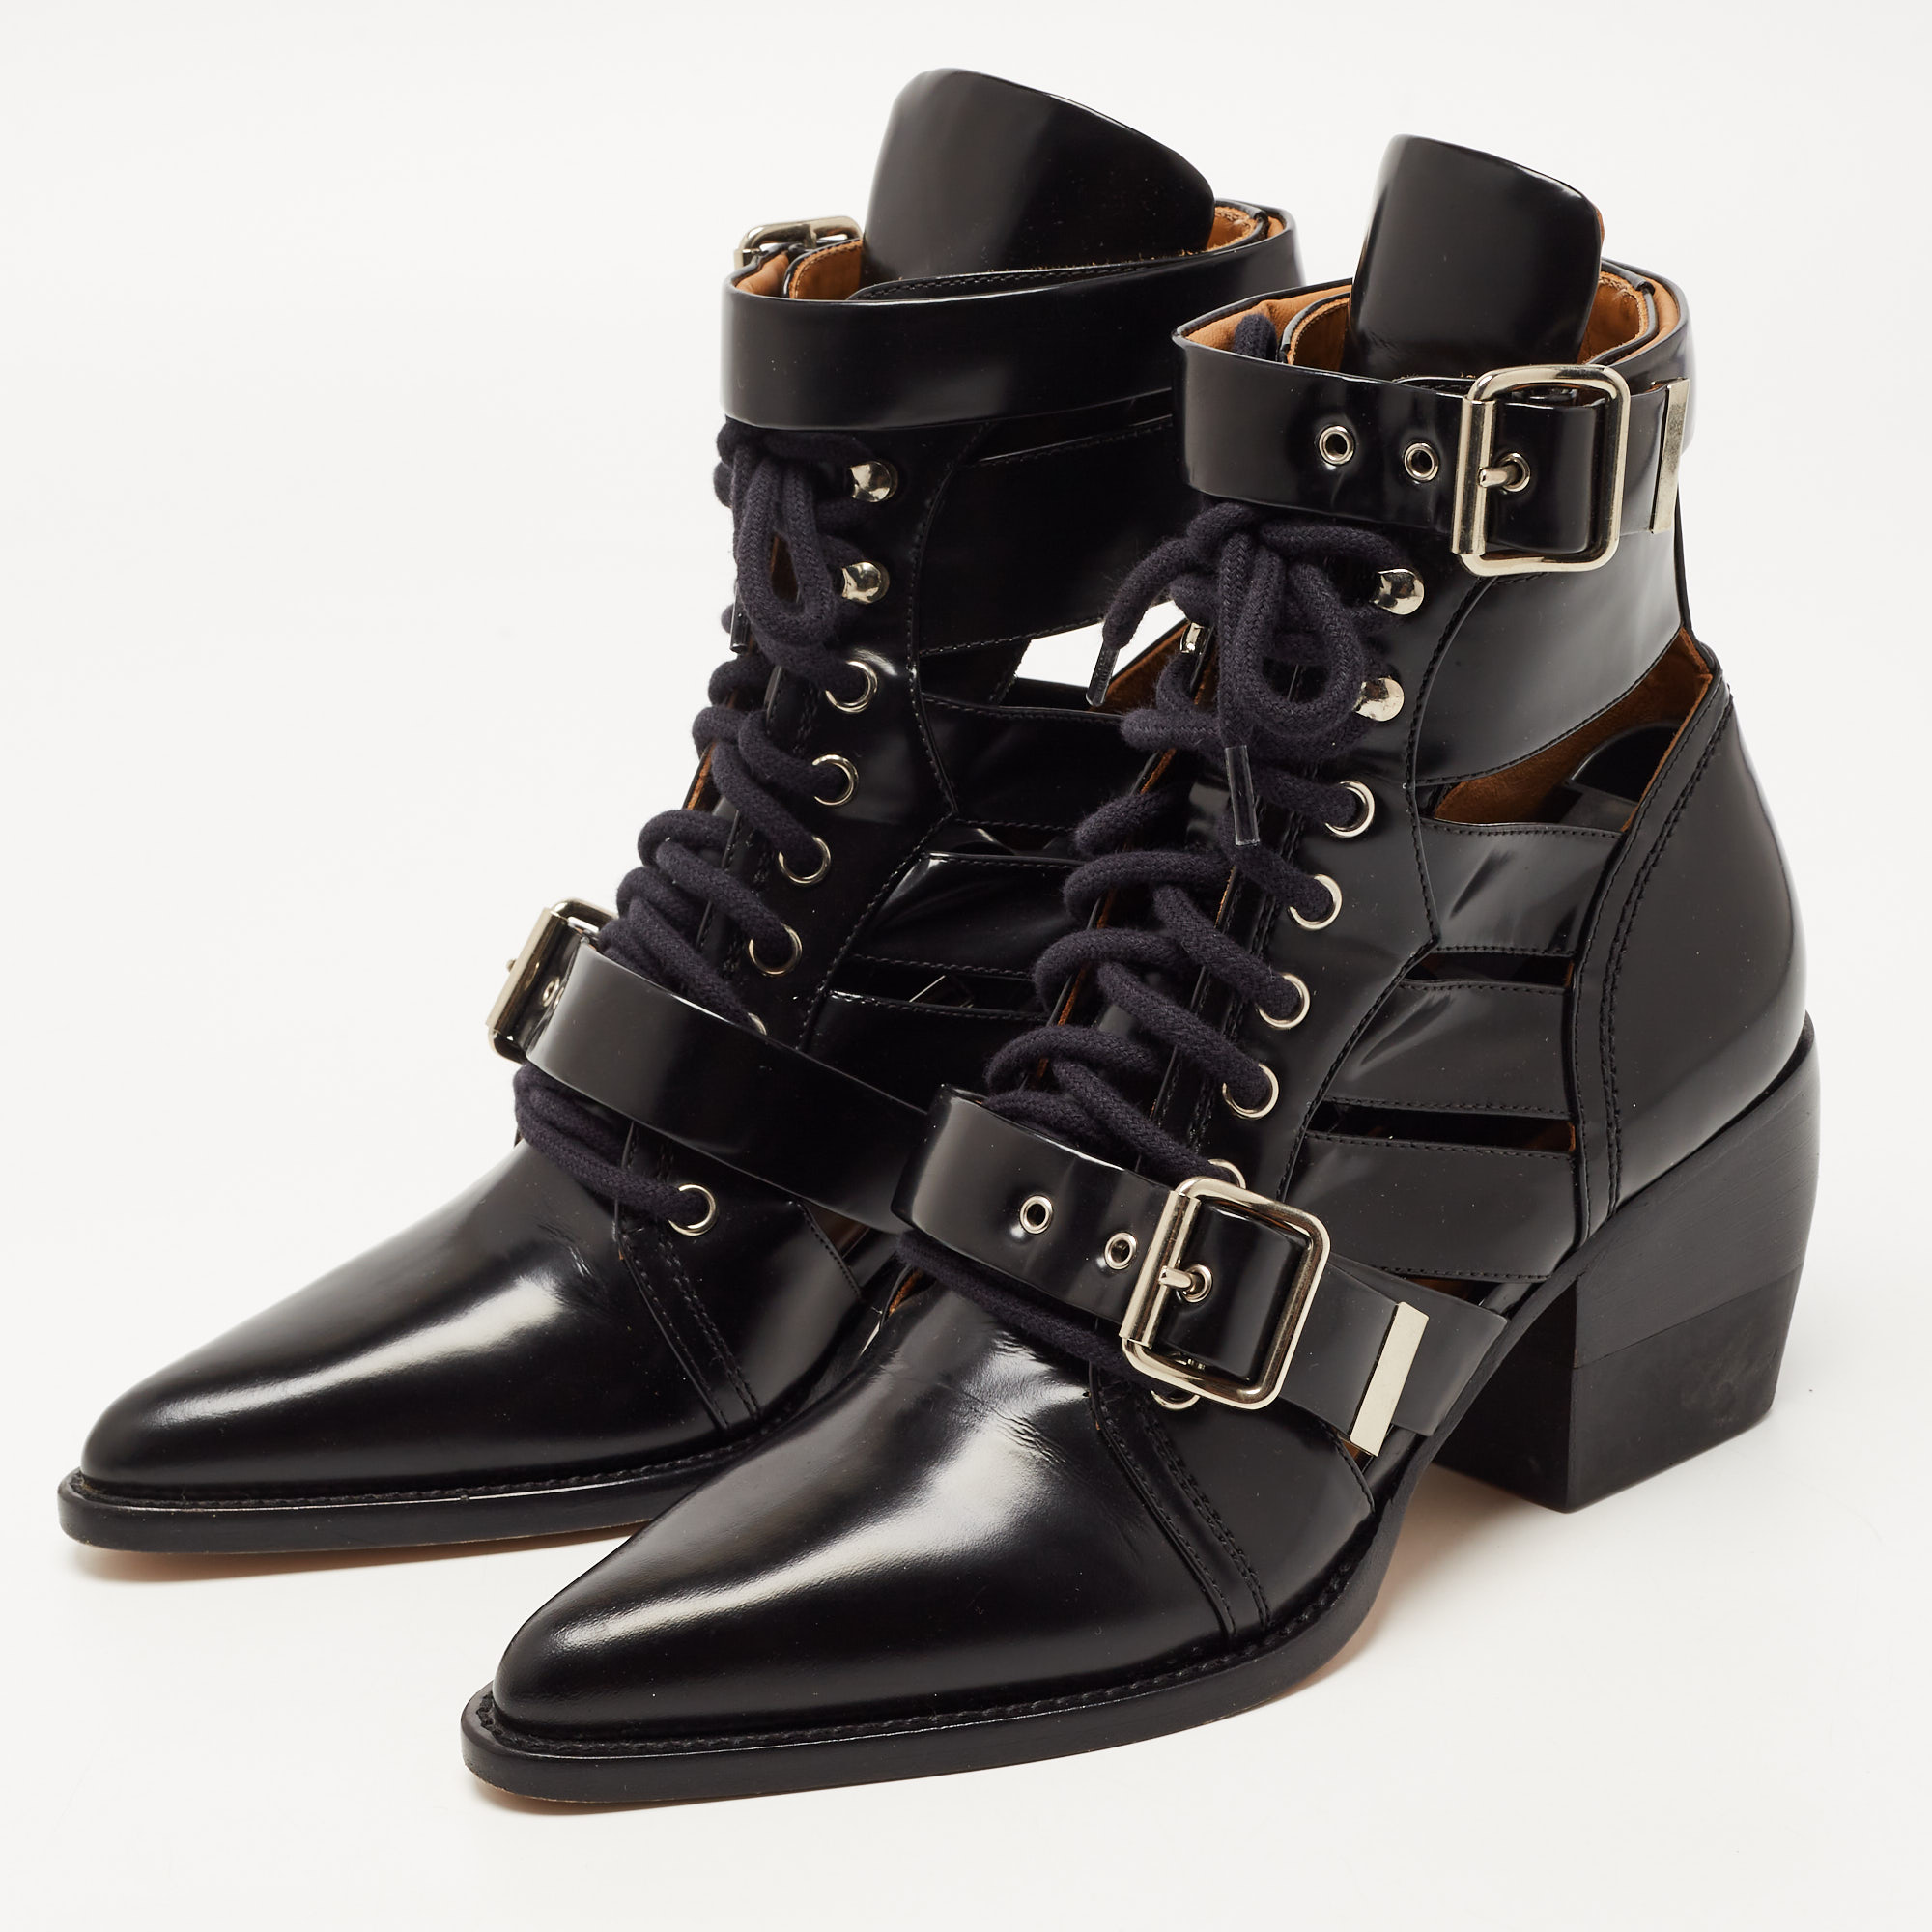 

Chloe Black Leather Rylee Buckle Detail Ankle Boots Size